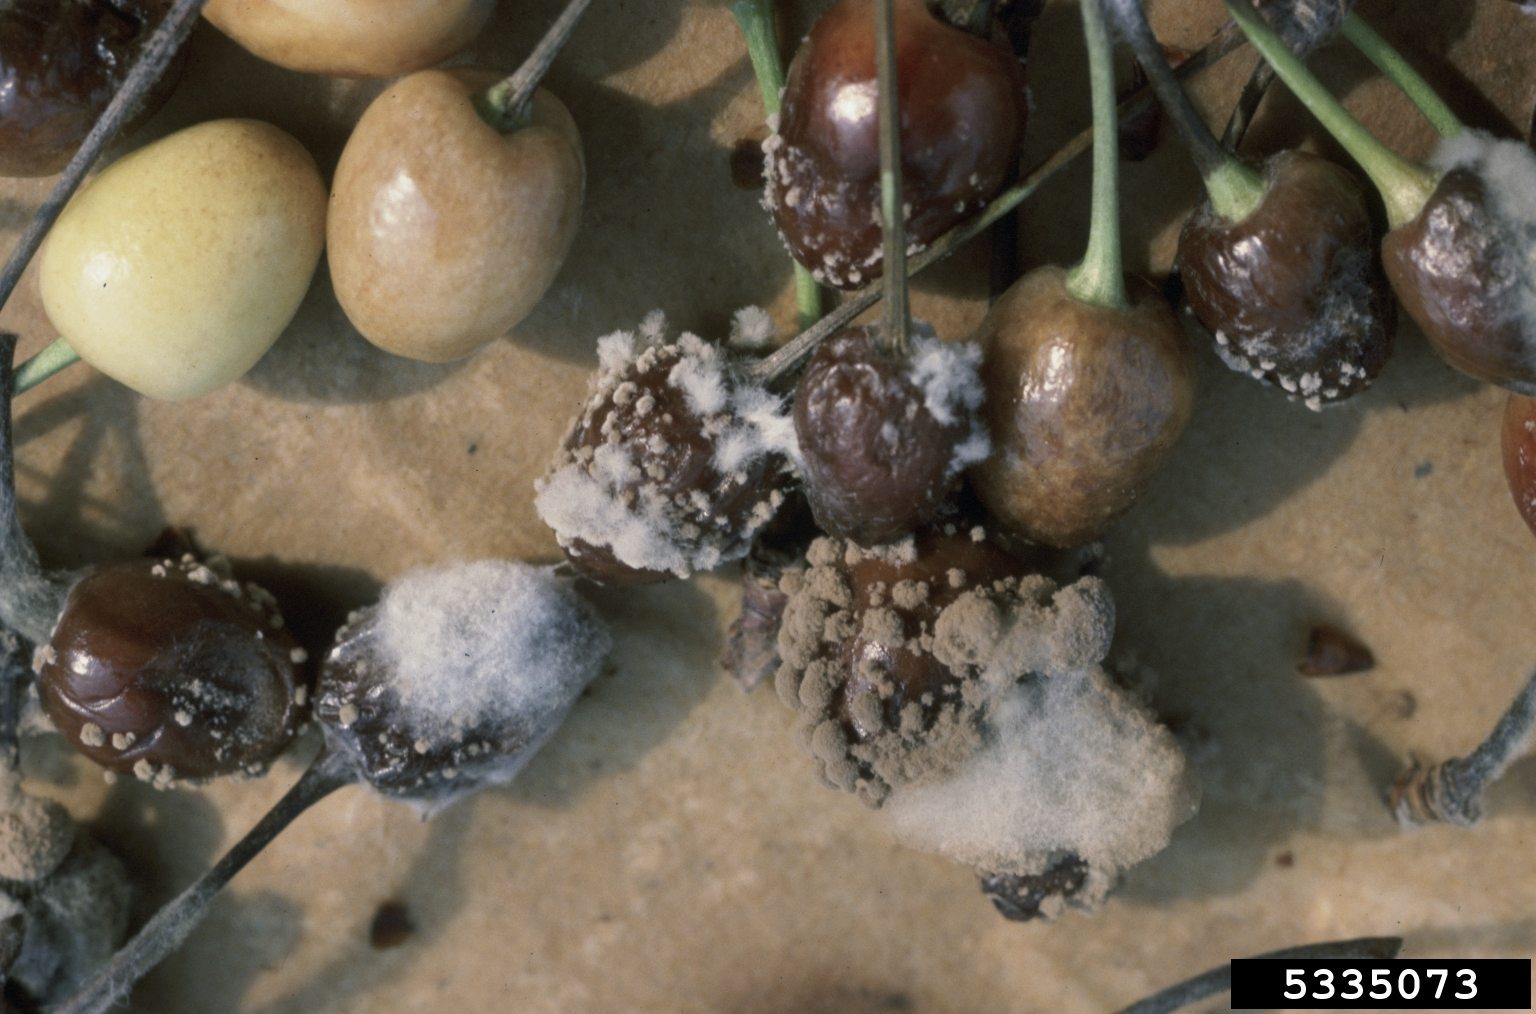 1534005156 learn about controlling brown rot in cherries takeseeds com - Learn More About Controlling Brown Rot In Cherries|TakeSeeds.com